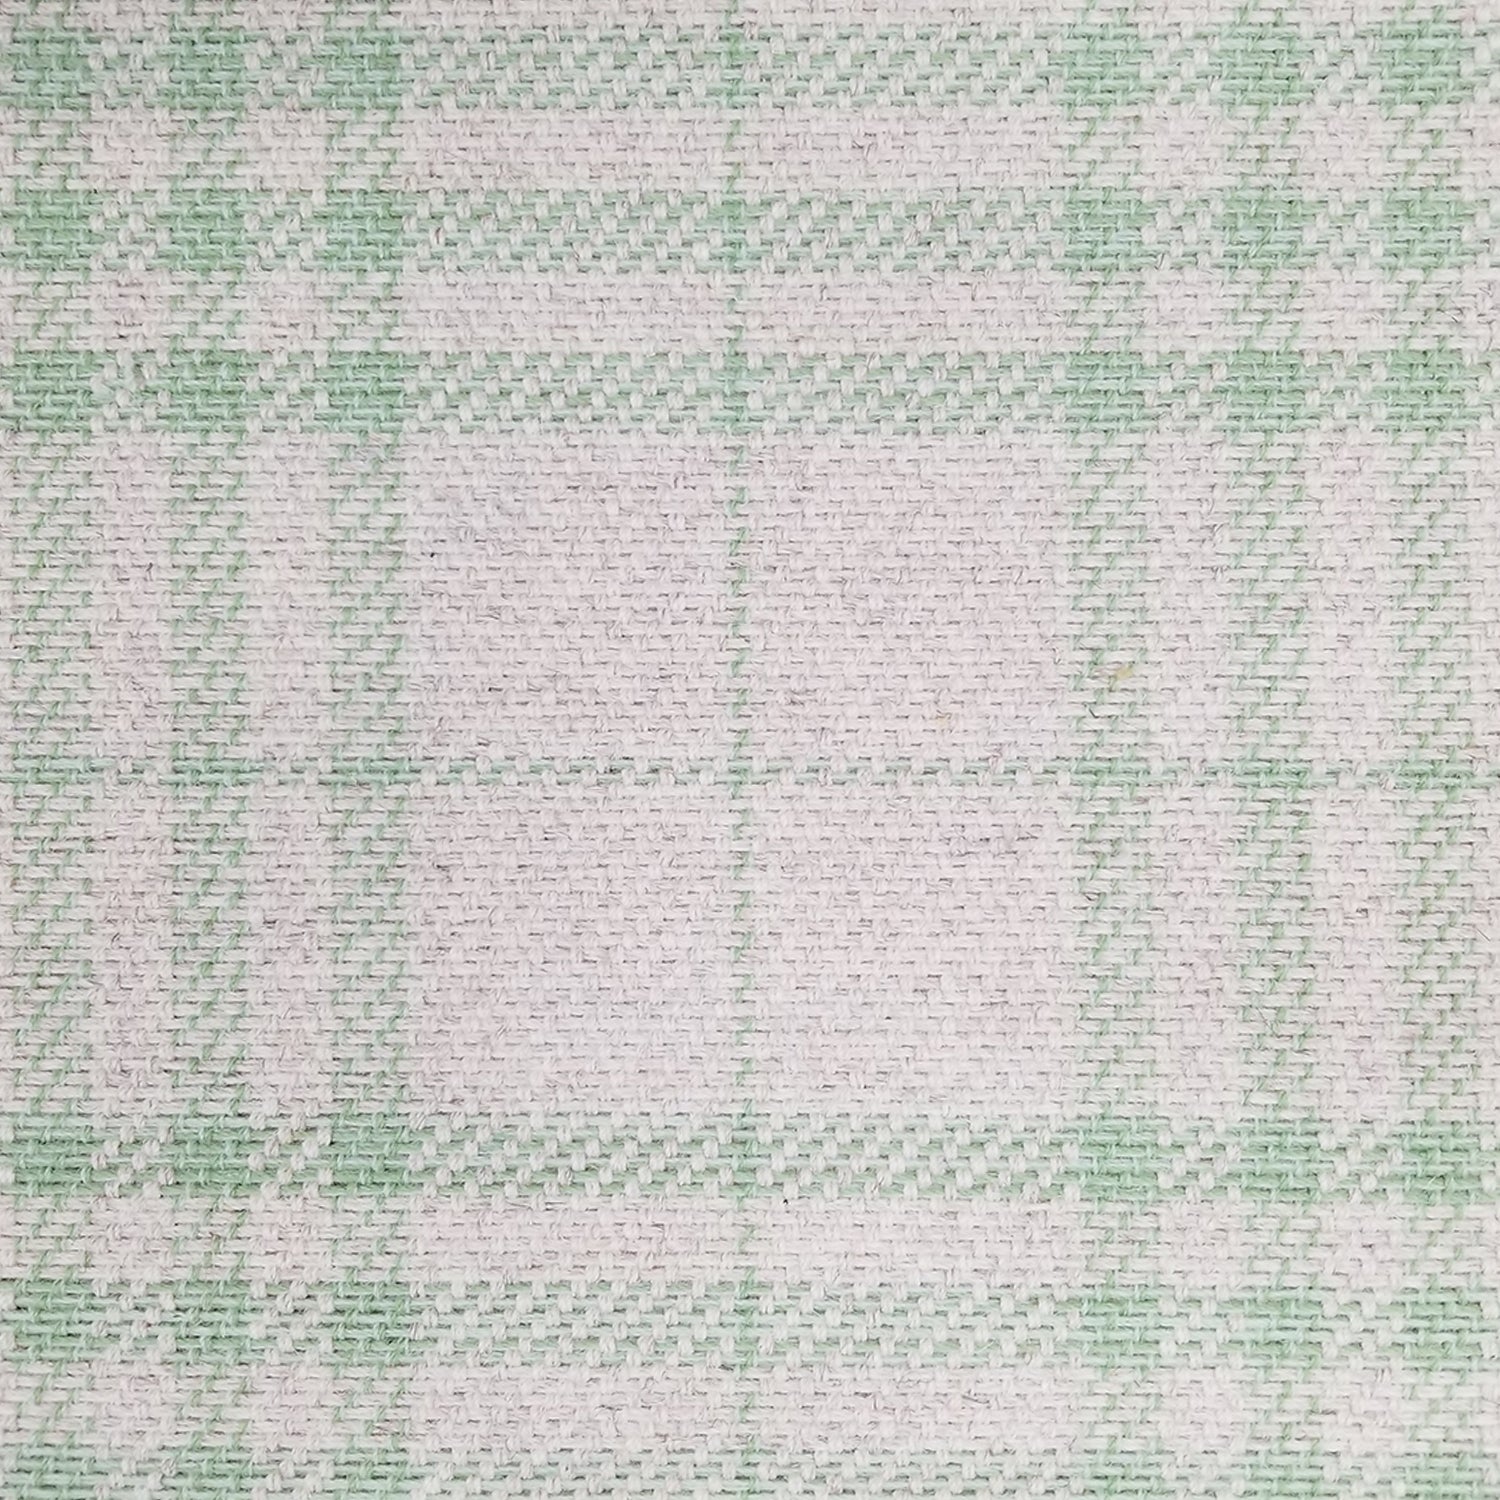 Wool broadloom carpet swatch in a light green and gray plaid pattern.